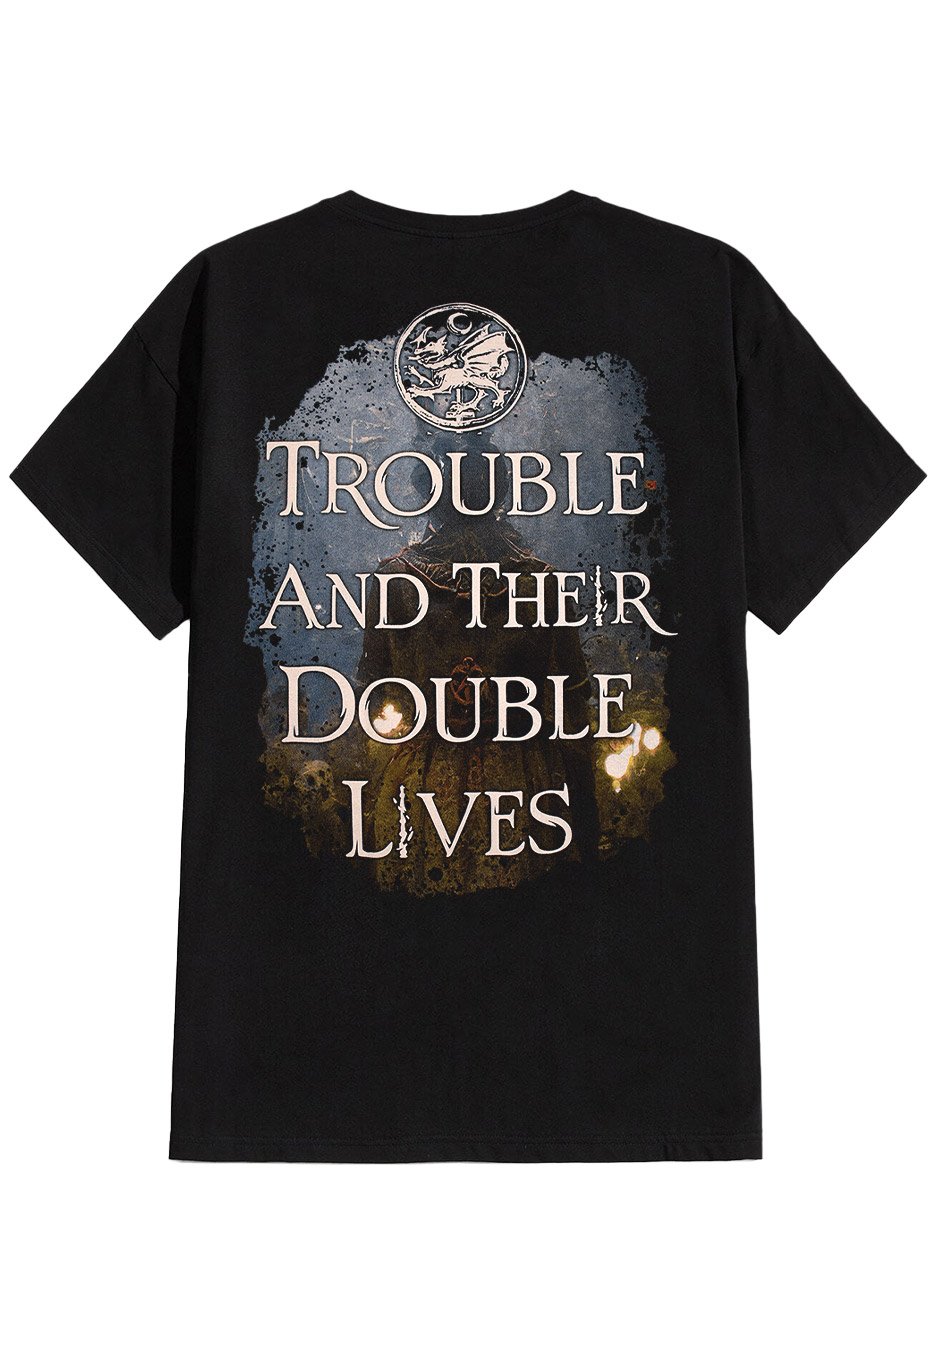 Cradle Of Filth - Trouble And Their Double Lives - T-Shirt